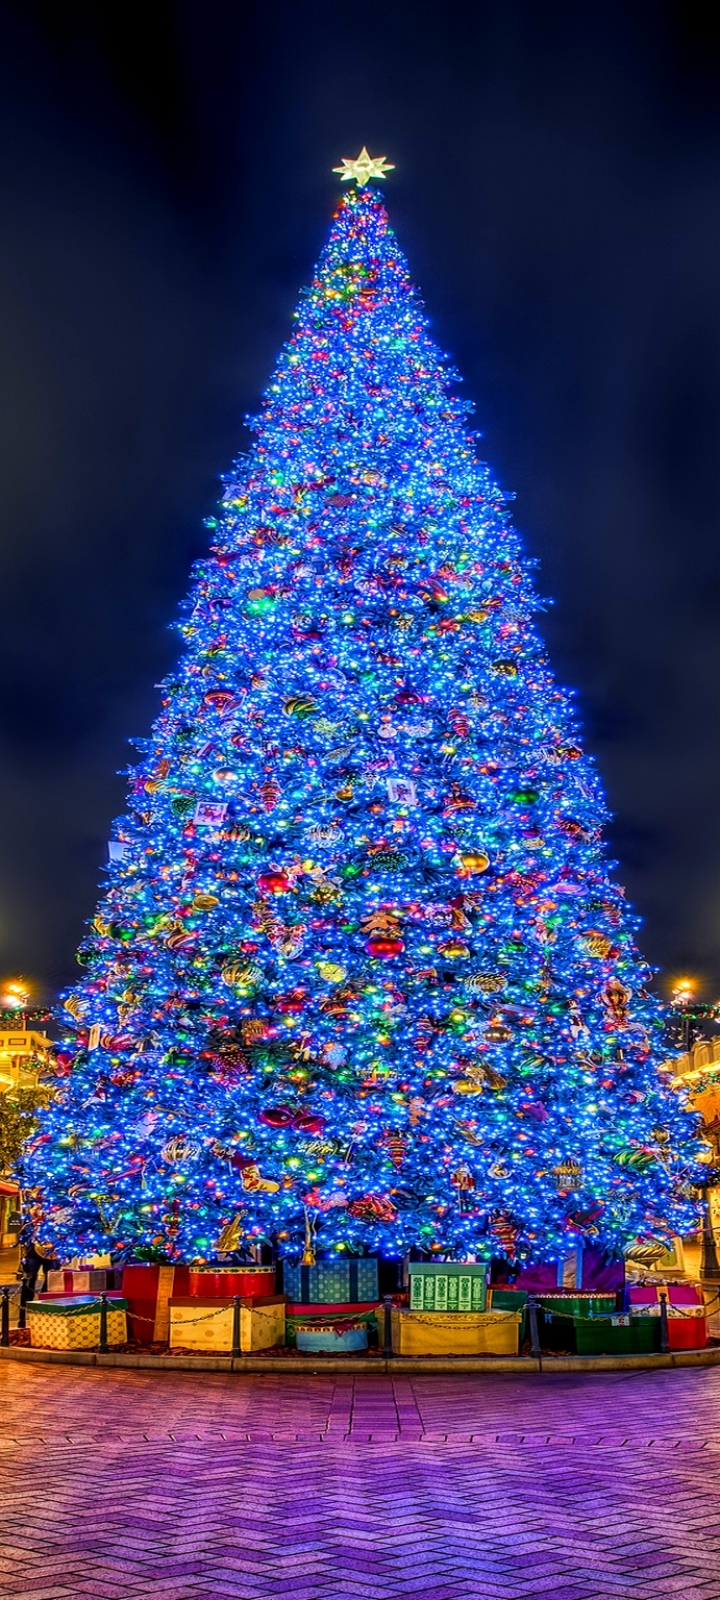 Lighted Christmas Tree in Town Square